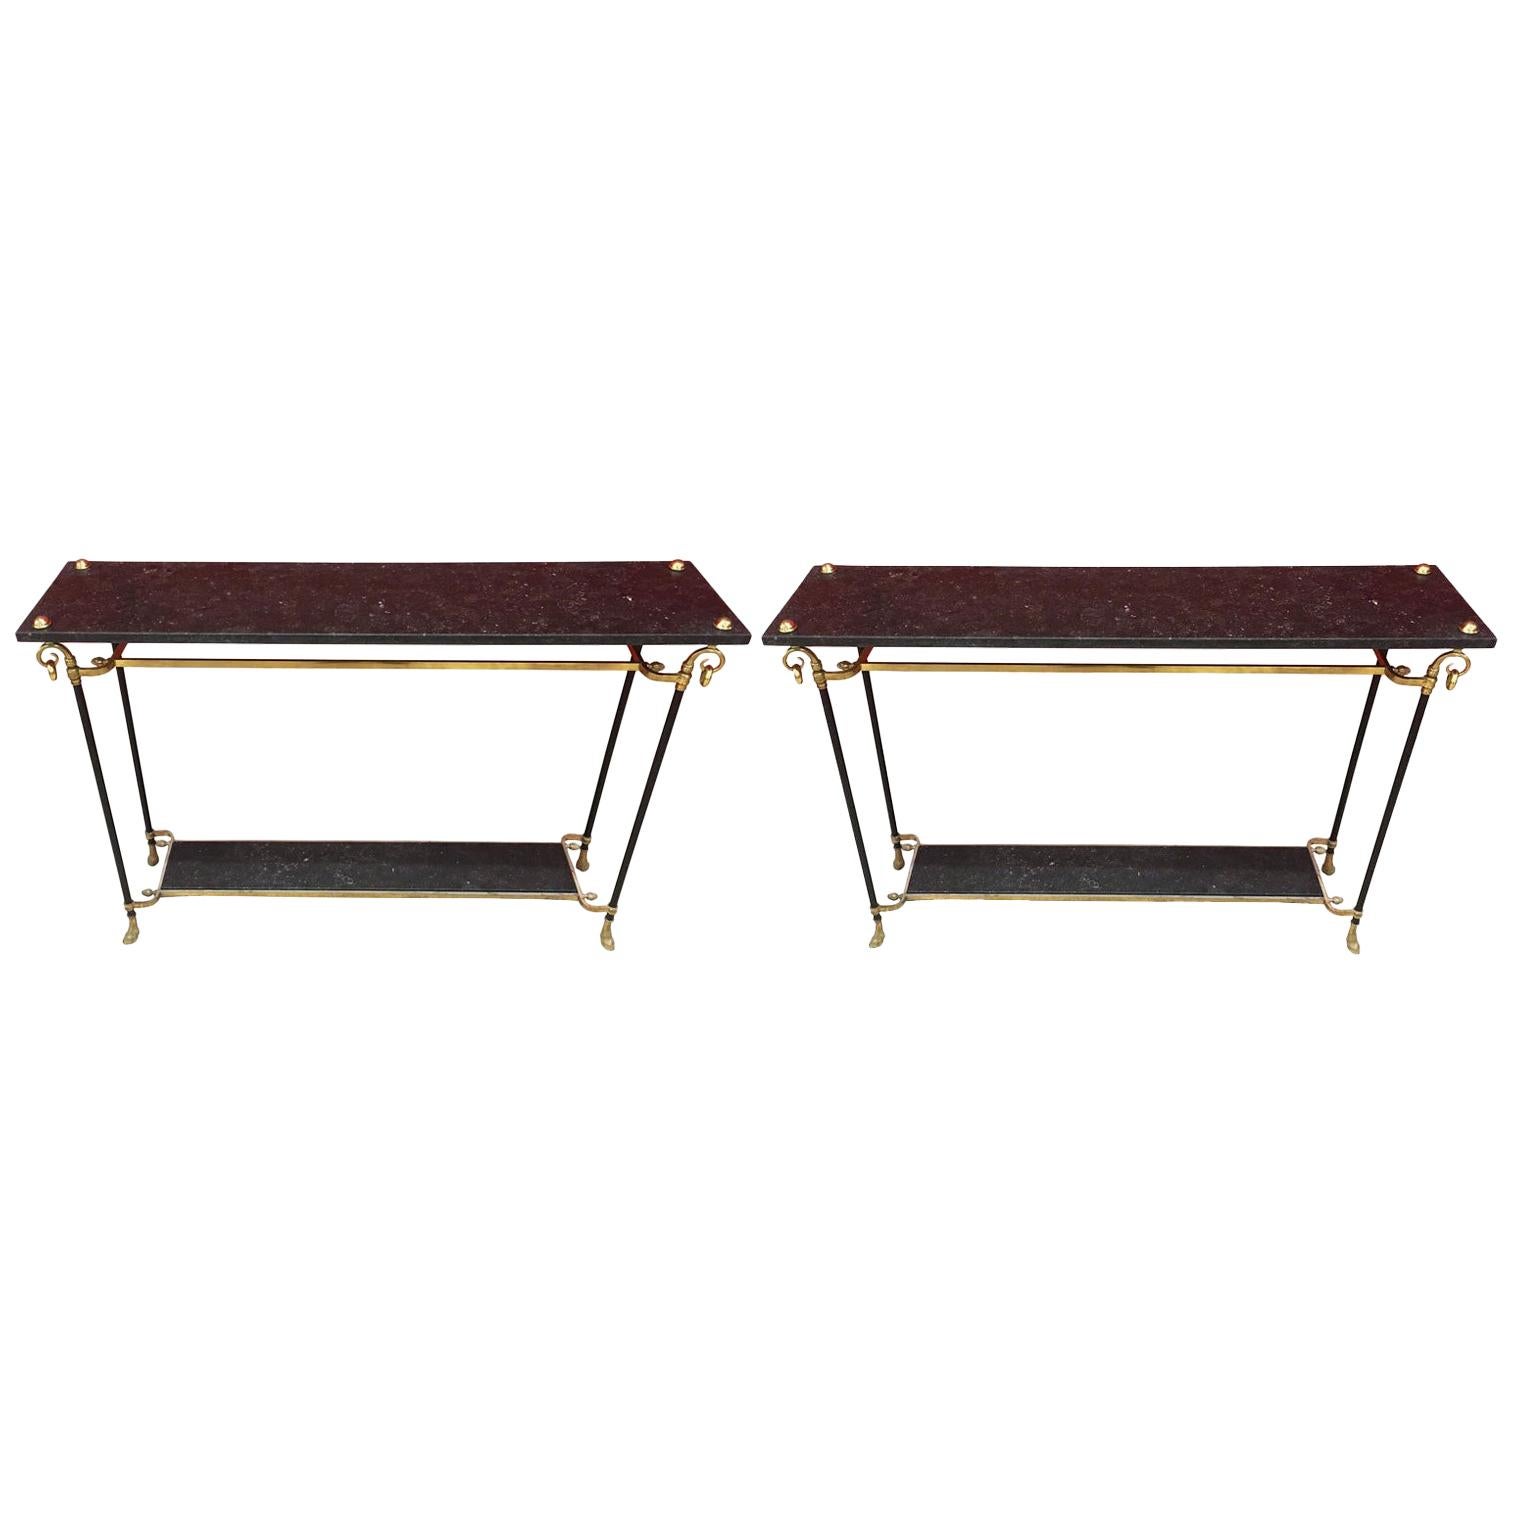 Maison Jansen, Rare Elegant , two Console Tables in Bronze, Brass and Marble